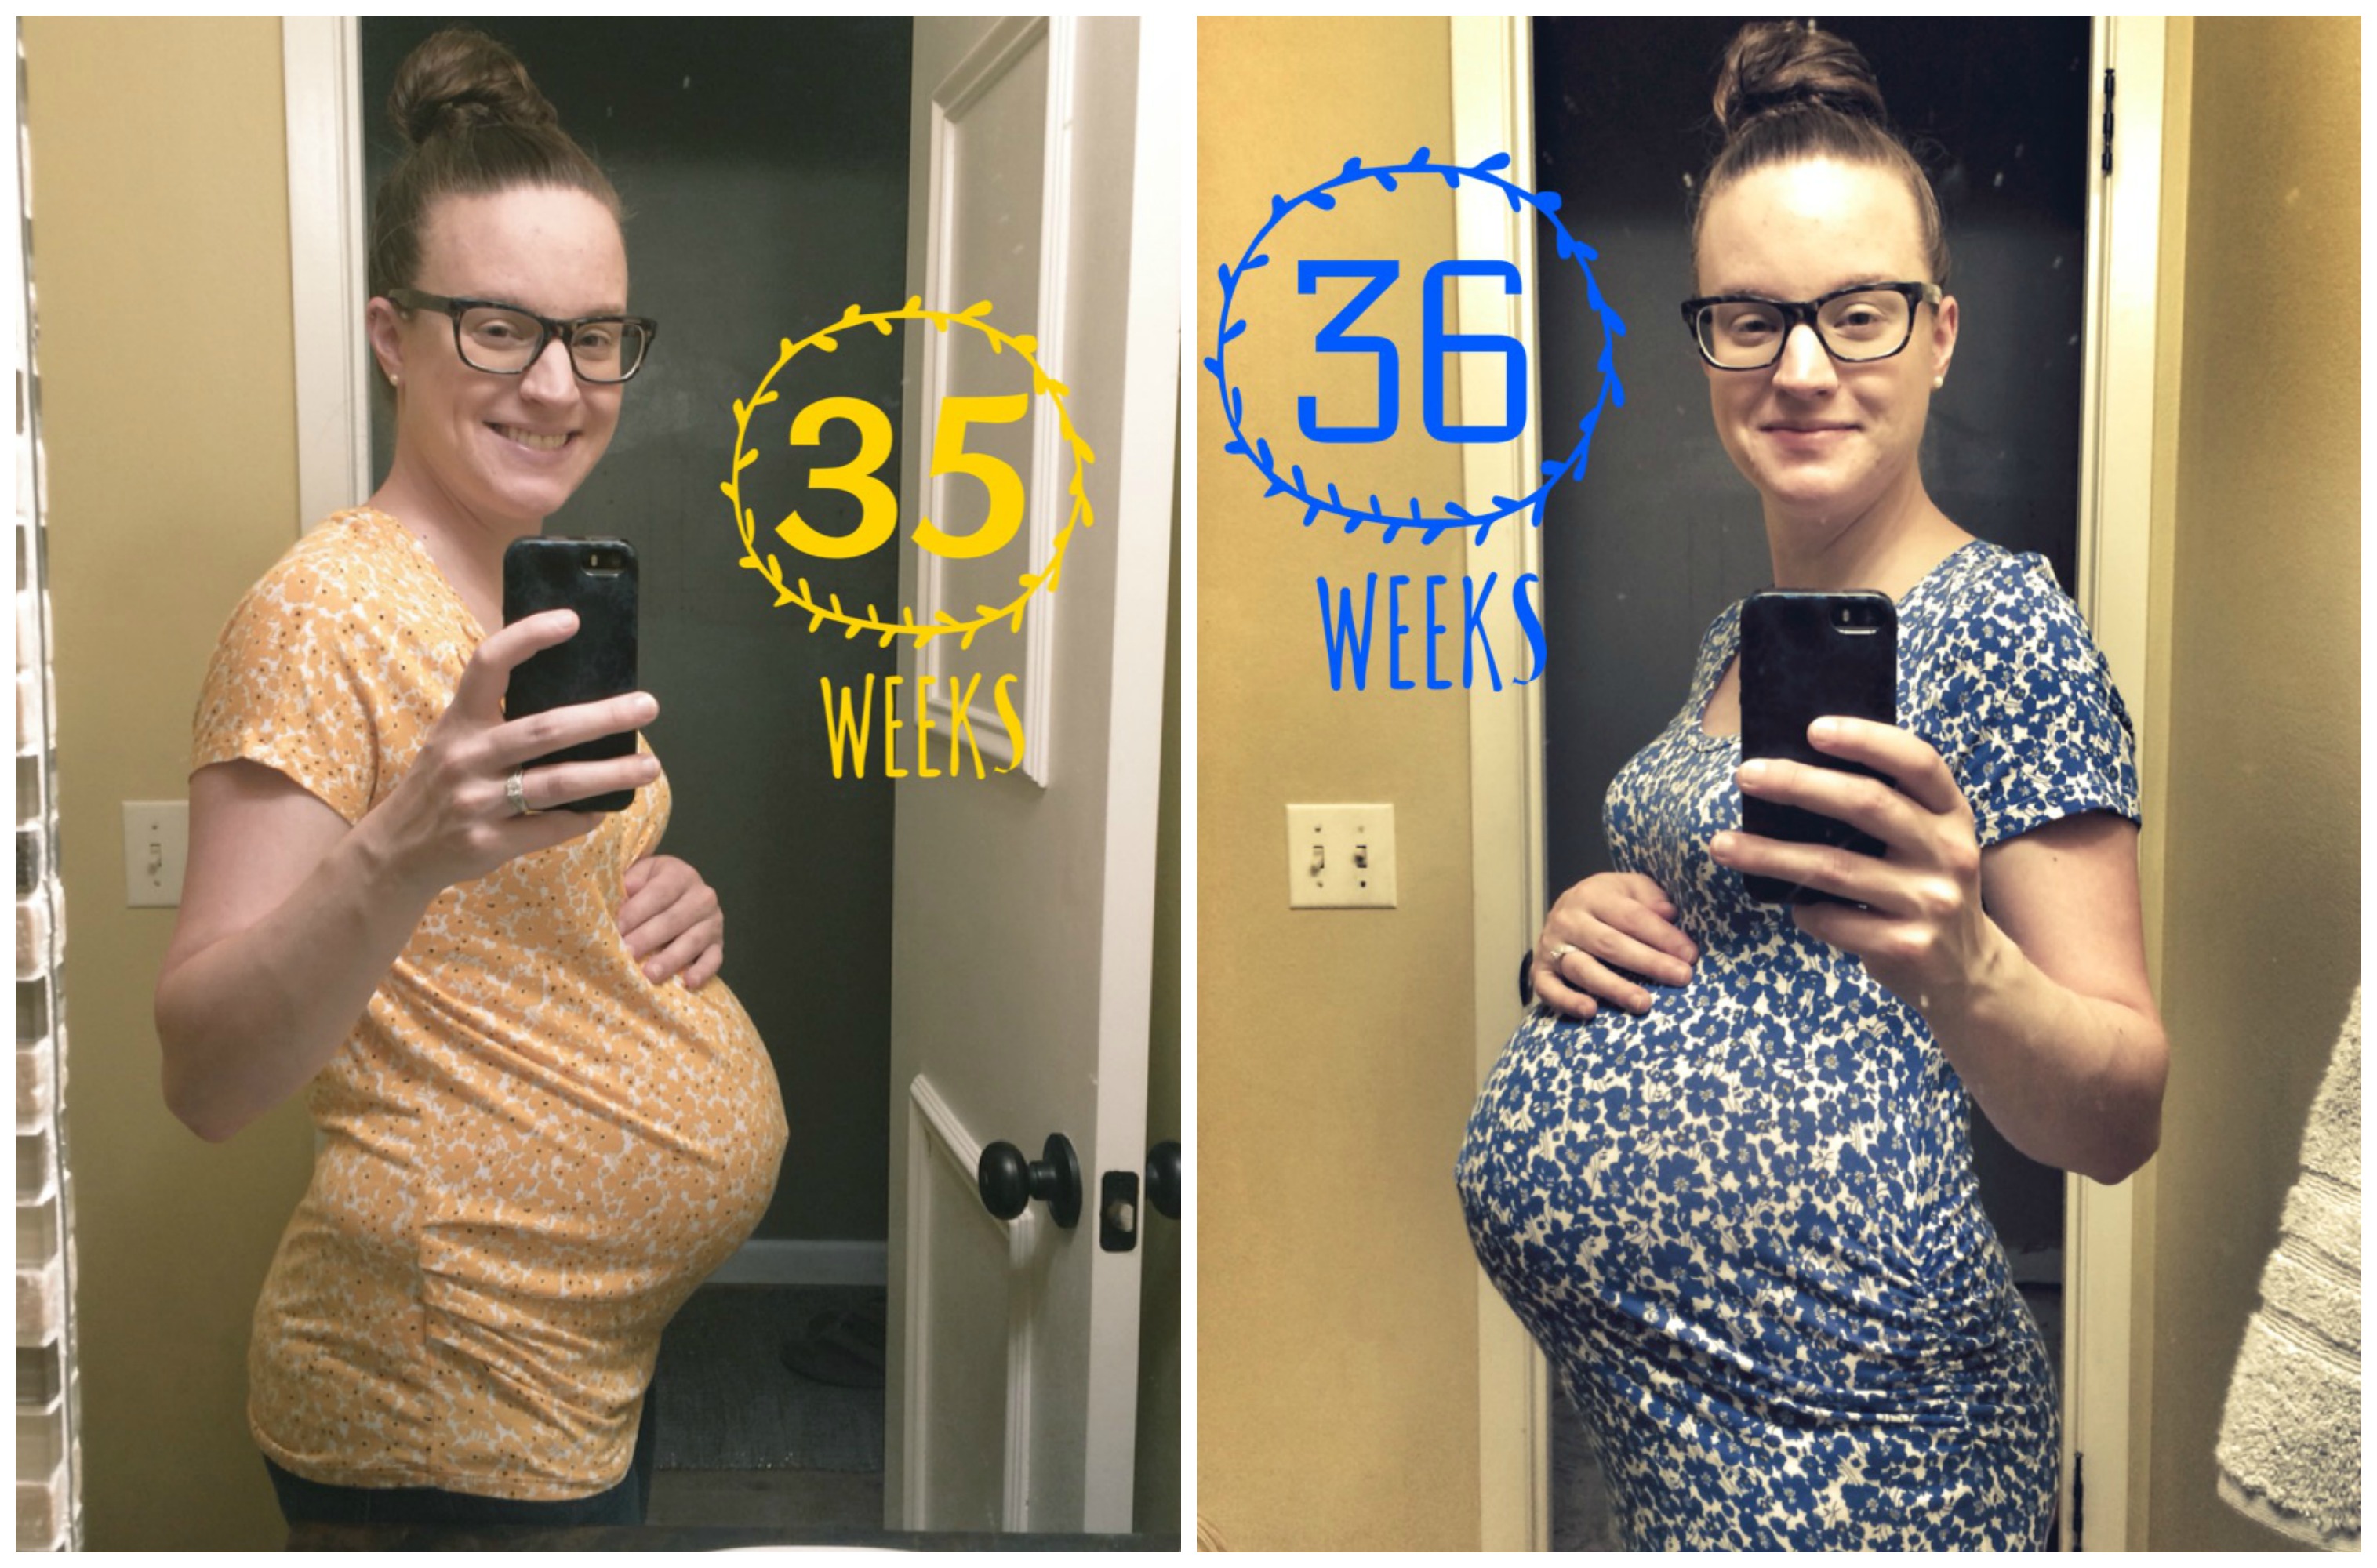 38 Week Pregnancy Update as we near the end of the third trimester!